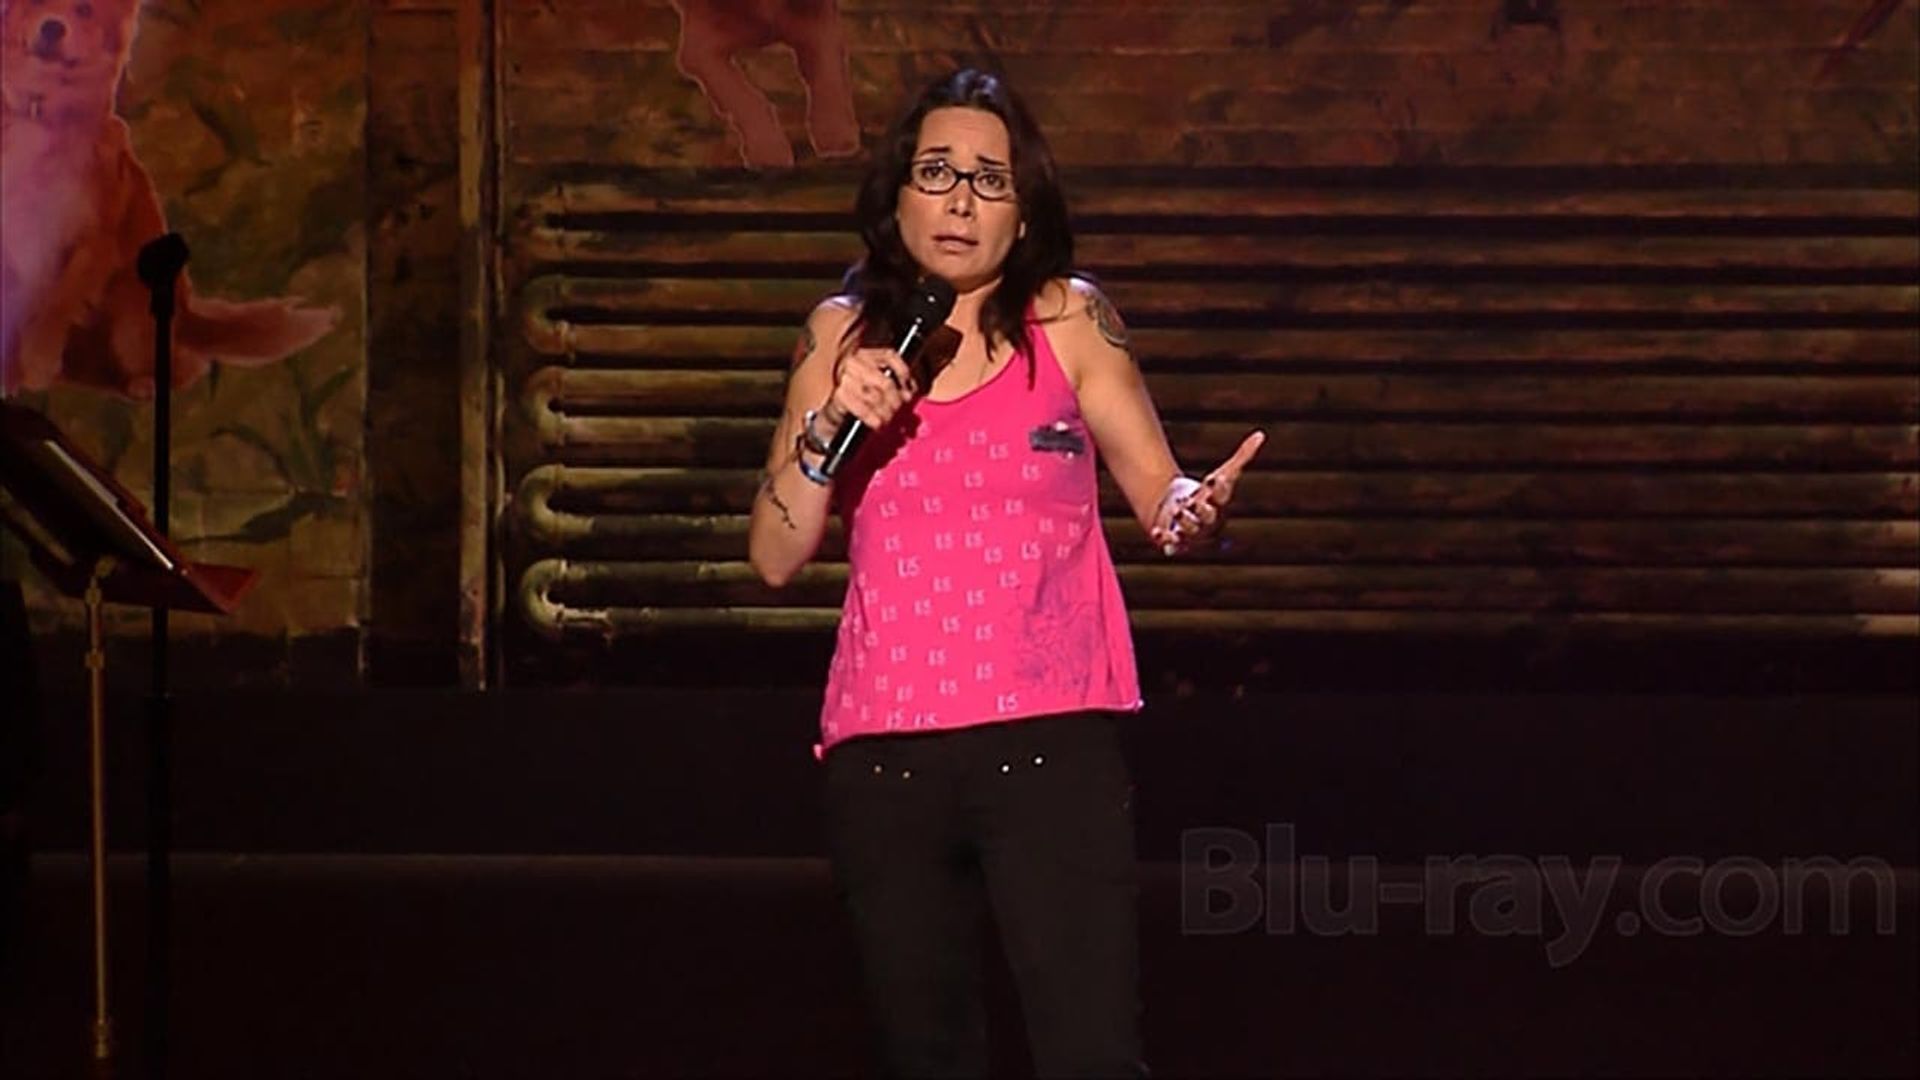 Janeane Garofalo: If You Will - Live in Seattle background